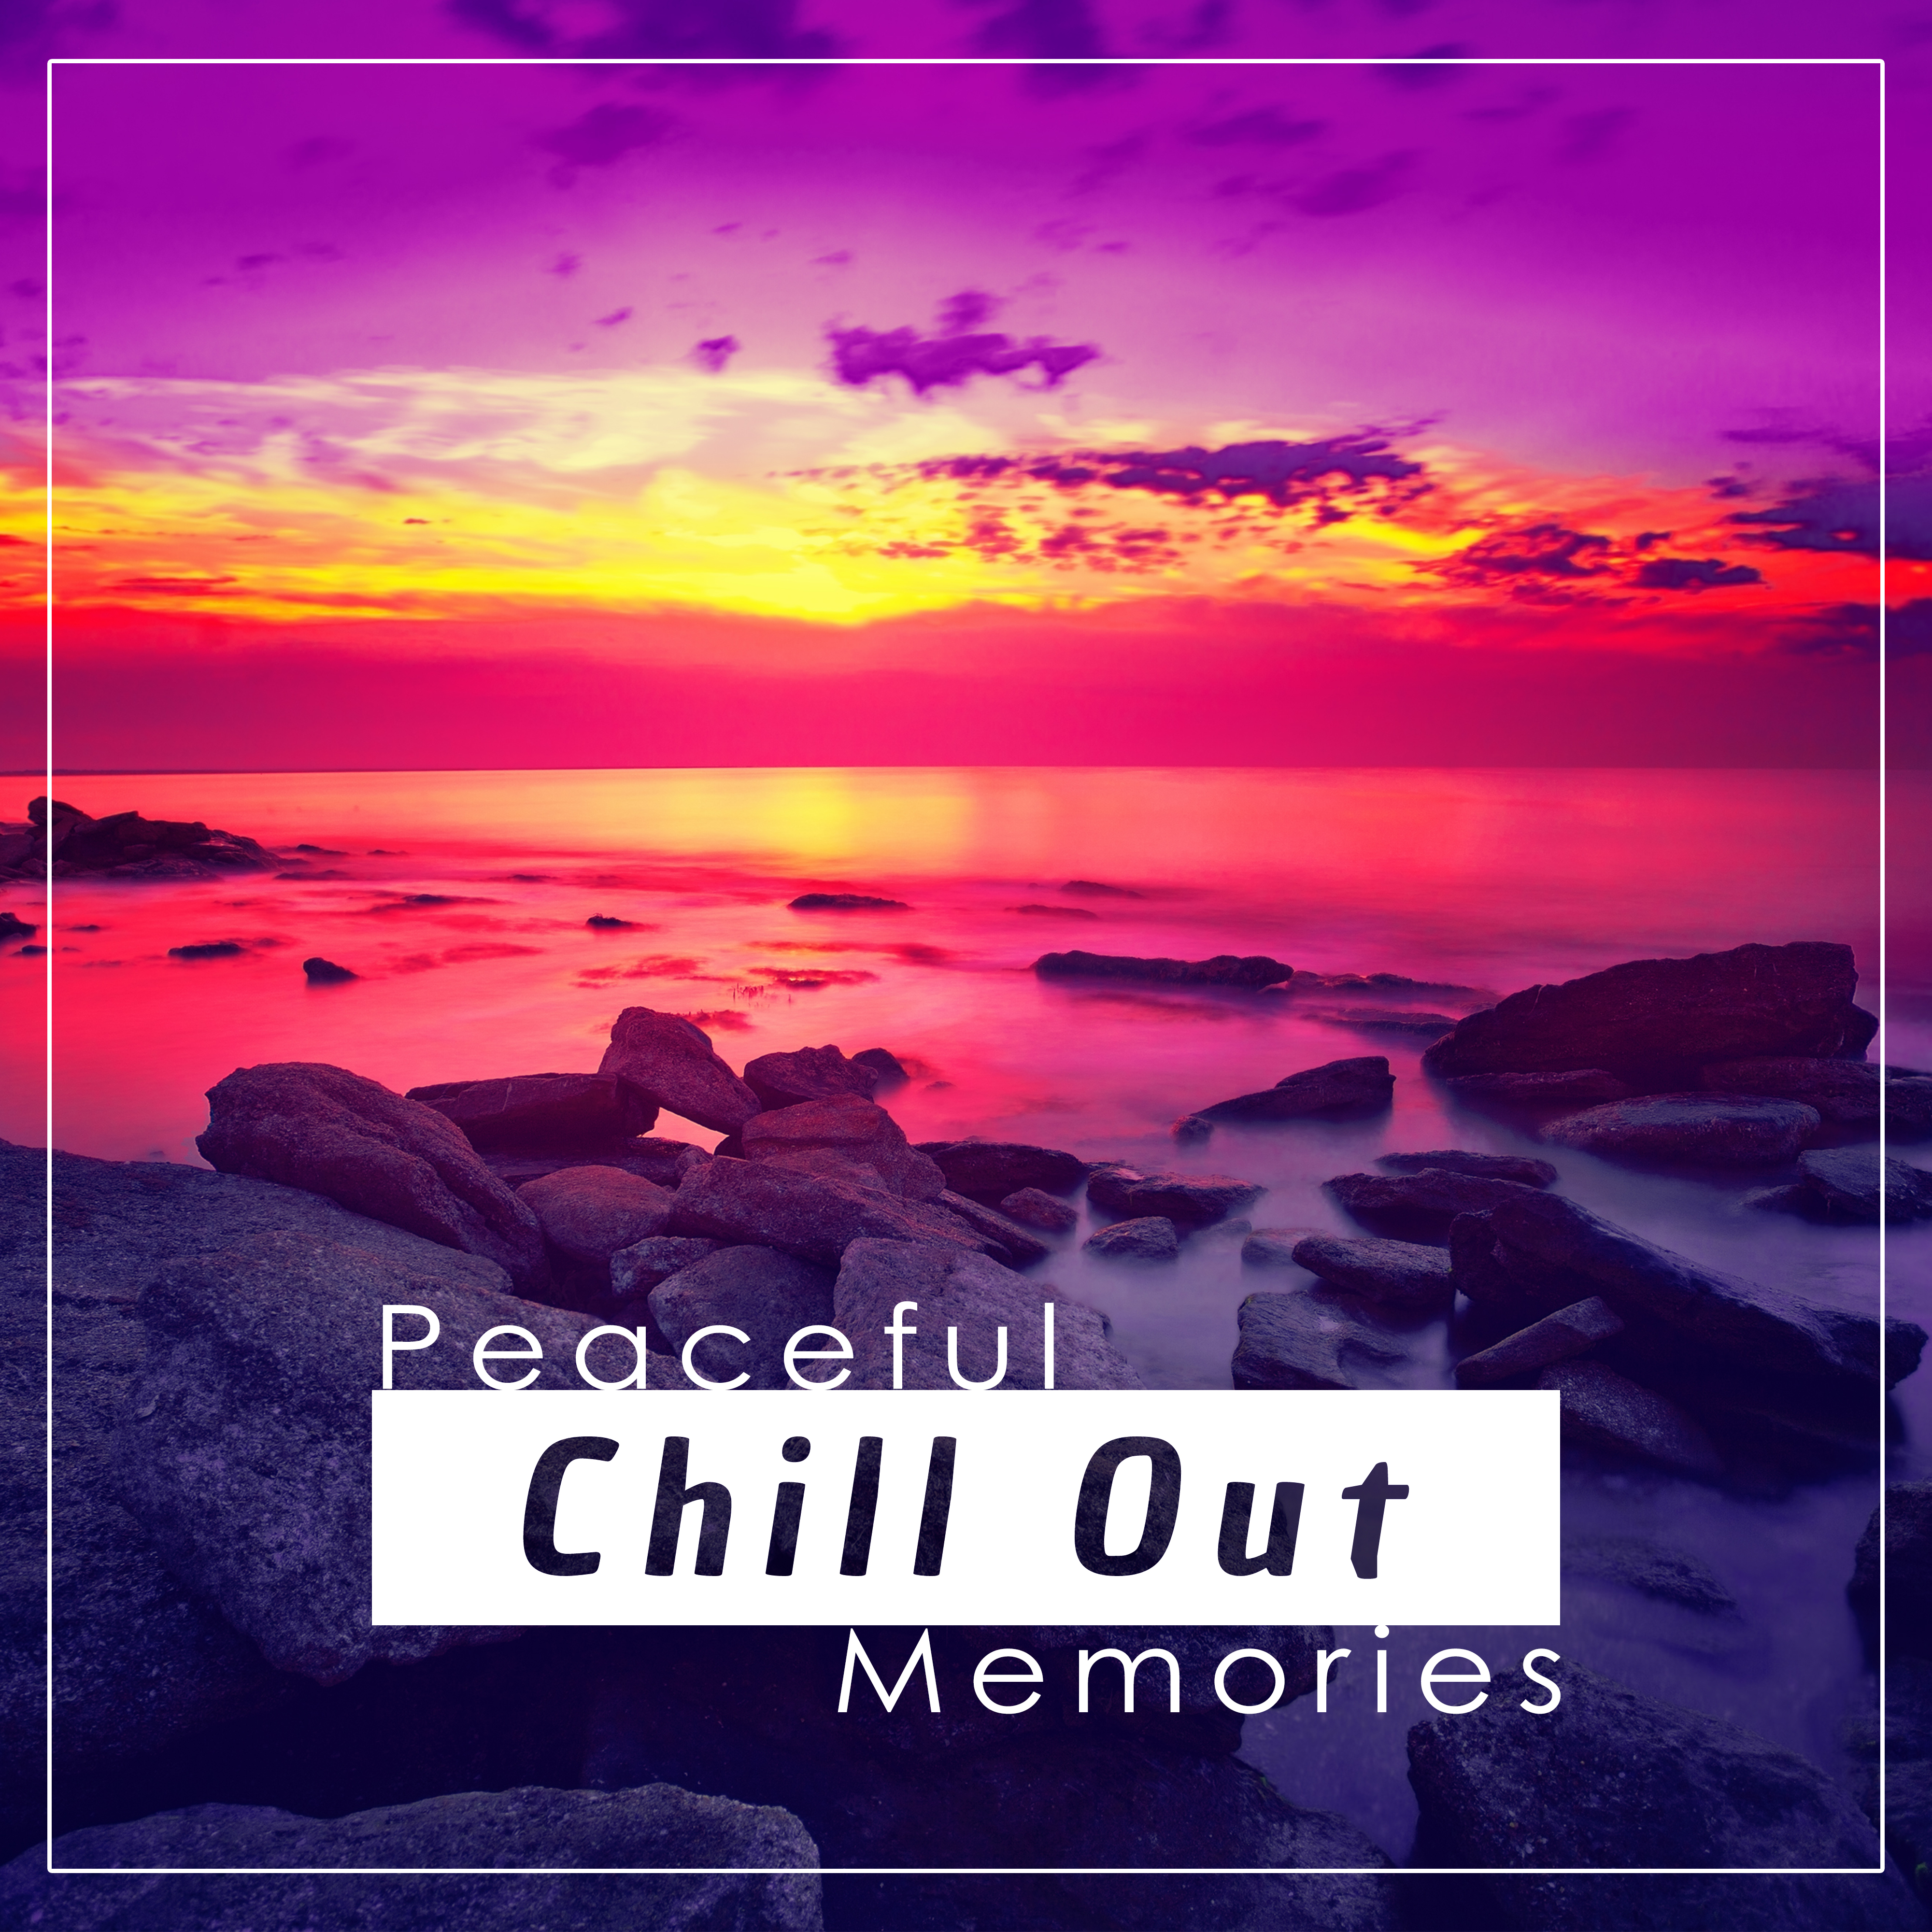 Peaceful Chill Out Memories – Calm Sounds to Relax, Chill Out 2017, Easy Listening, Stress Relief, Healing Waves